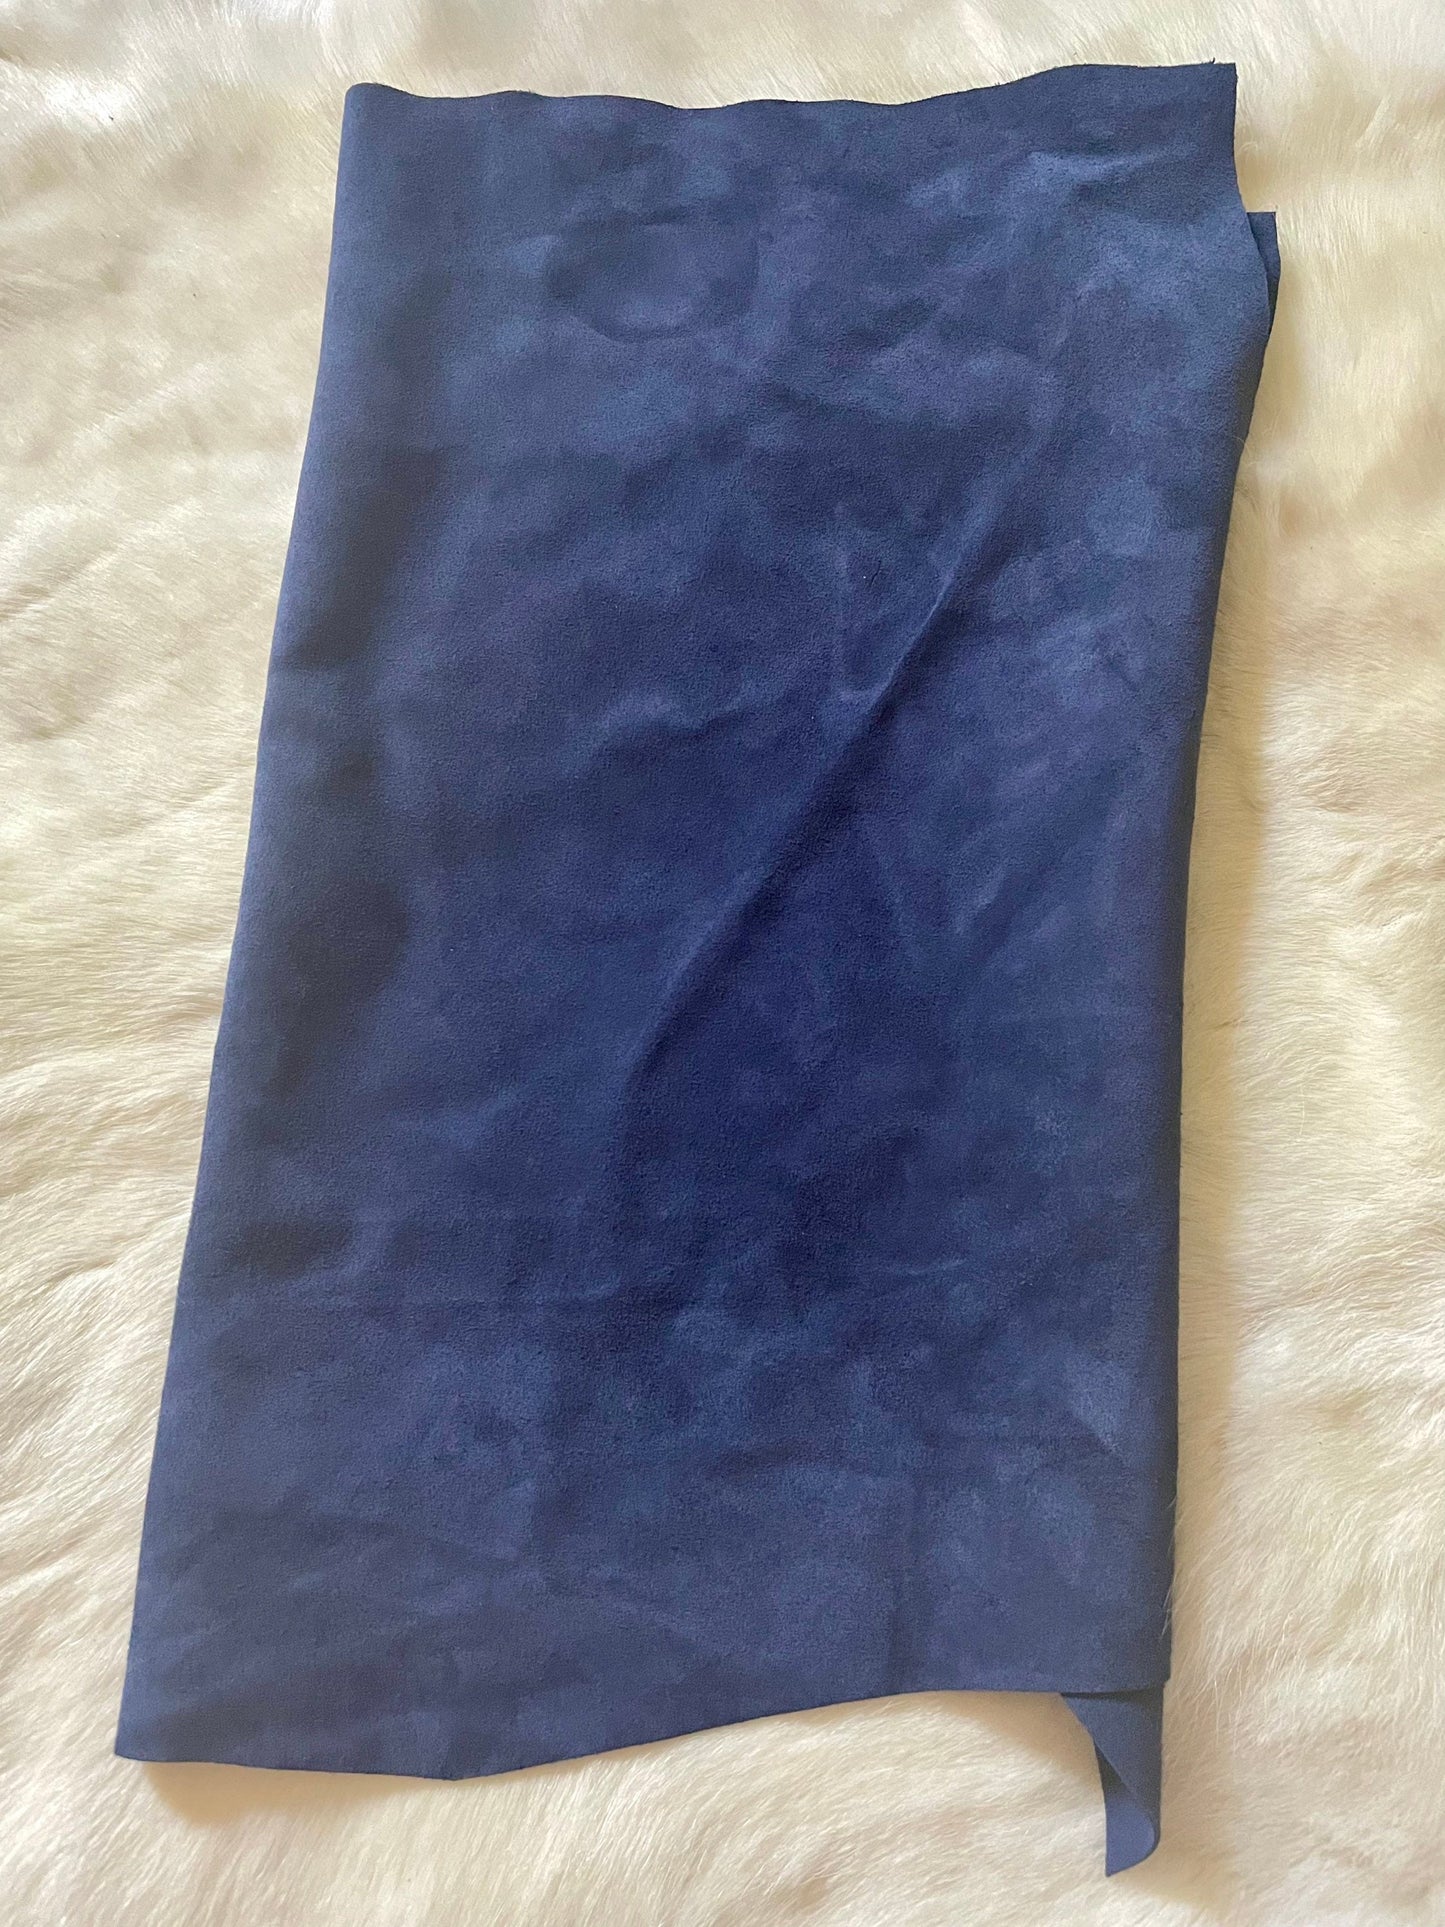 Navy Suede Designer leather - Raw Leather - Wholesale Leather 2-4oz